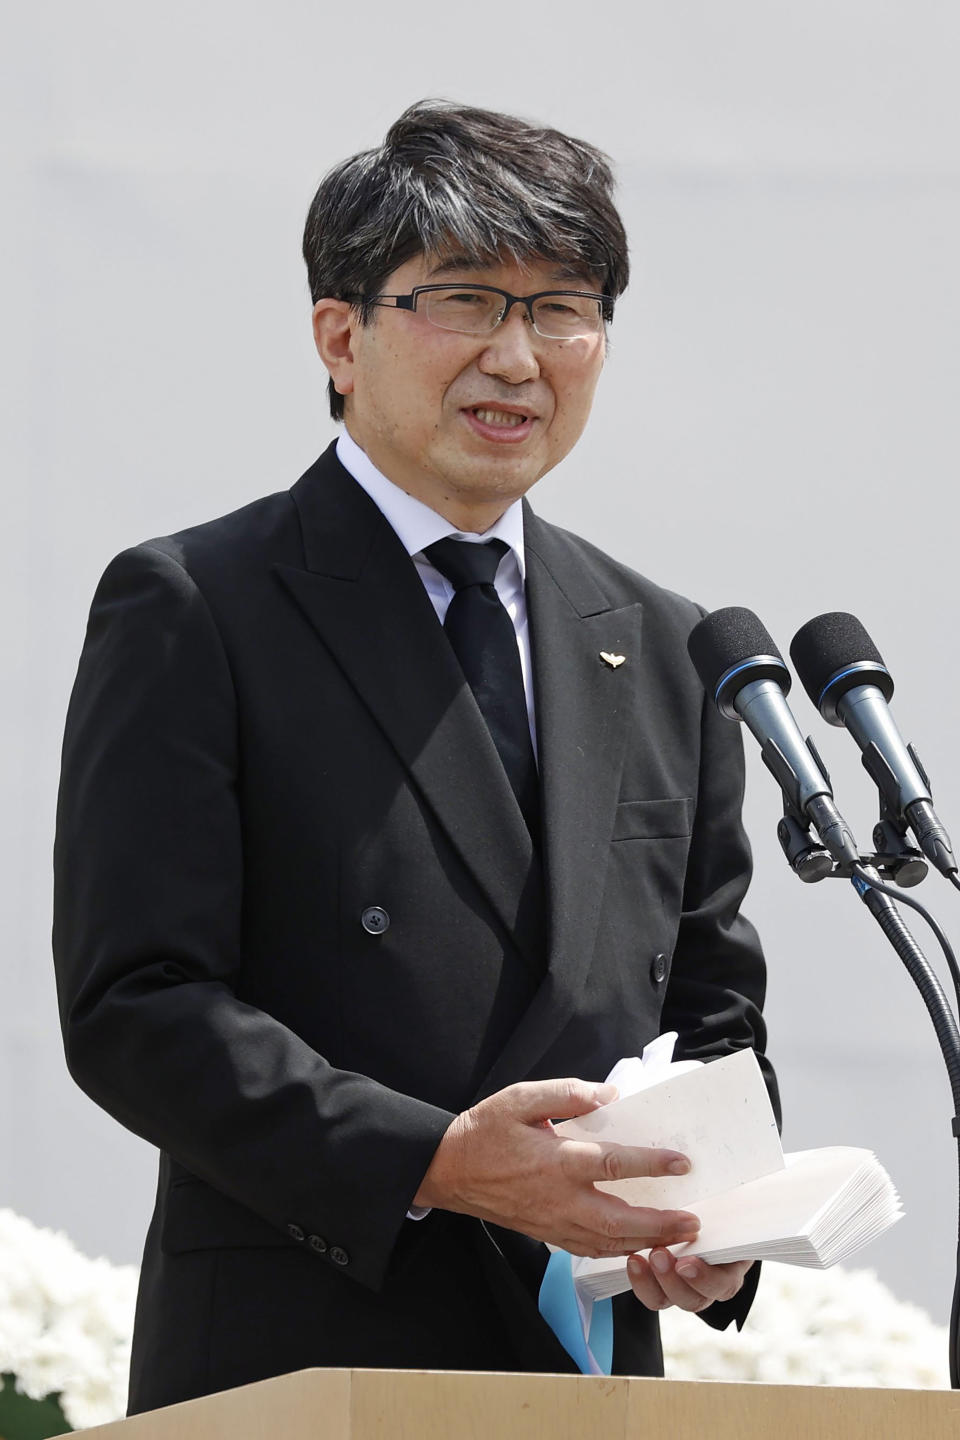 Nagasaki Mayor Tomihisa Taue delivers a speech during a ceremony to mark the 77th anniversary of the U.S. atomic bombing at the Peace Park in Nagasaki, southern Japan, Tuesday, Aug. 9, 2022. (Kyodo News via AP)